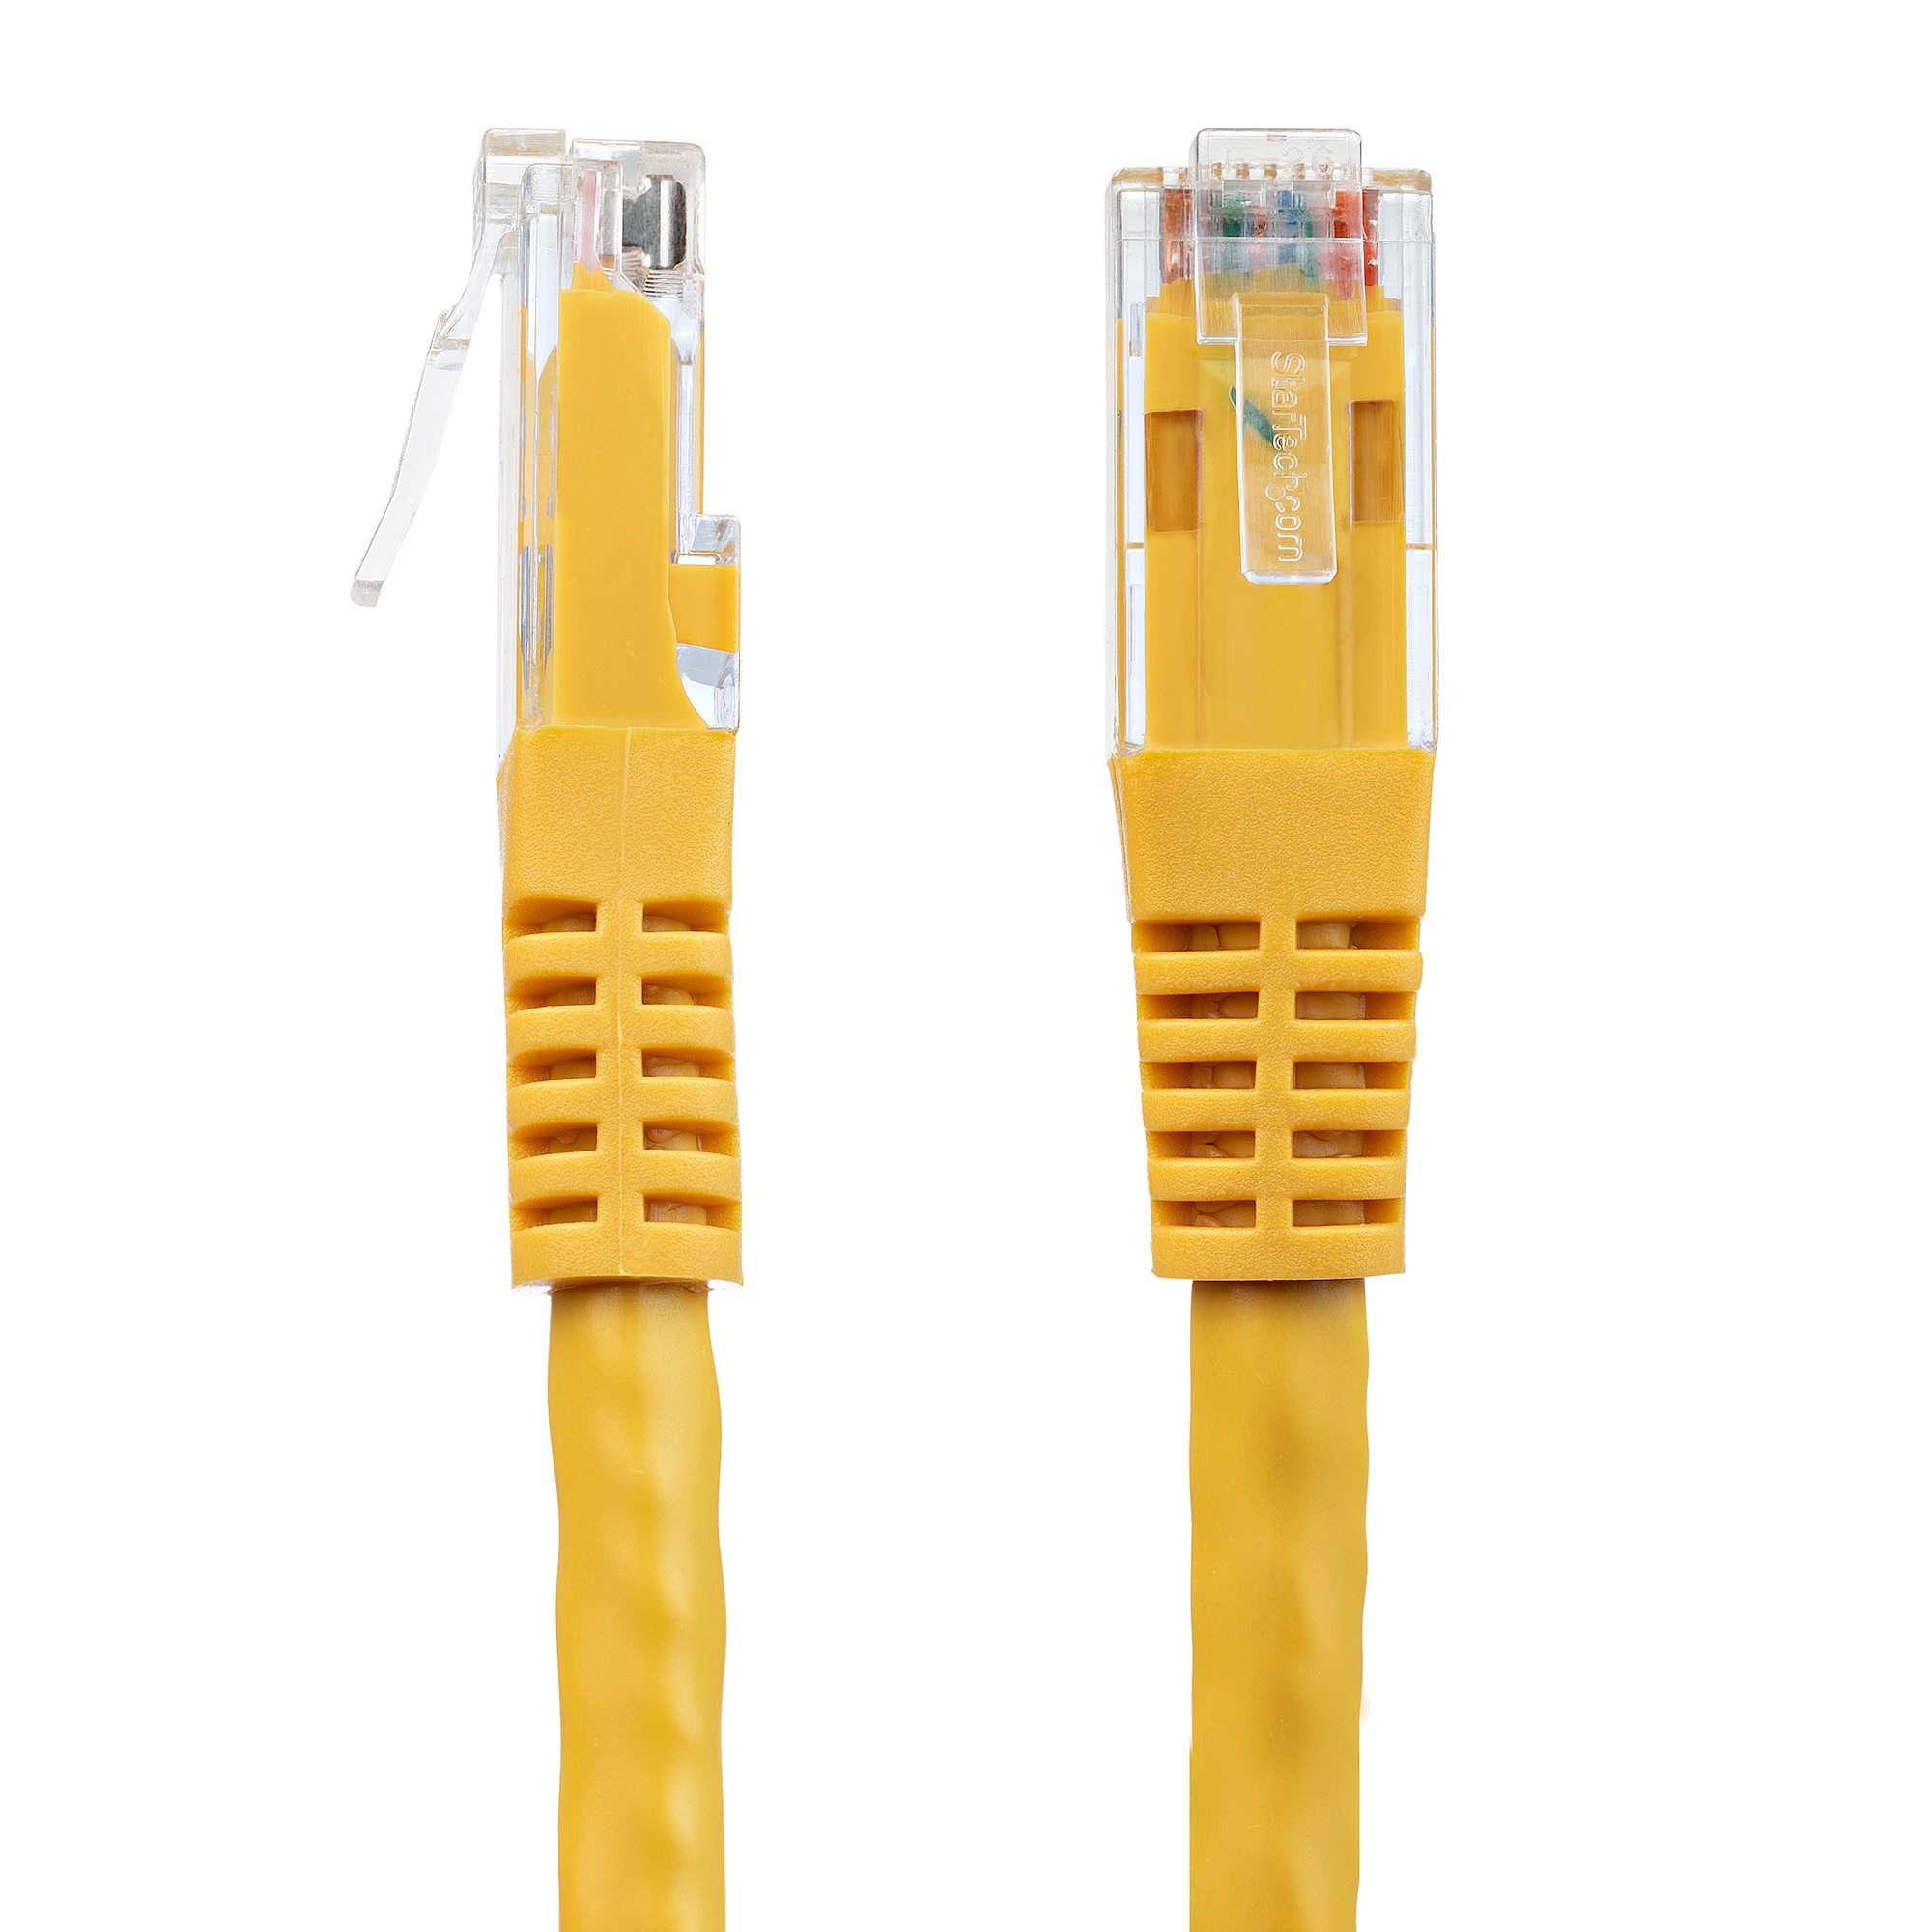 CAT6 CAT 6 Ethernet Cable Lan Network Internet Patch Cord Yellow POE RJ45 LOT 